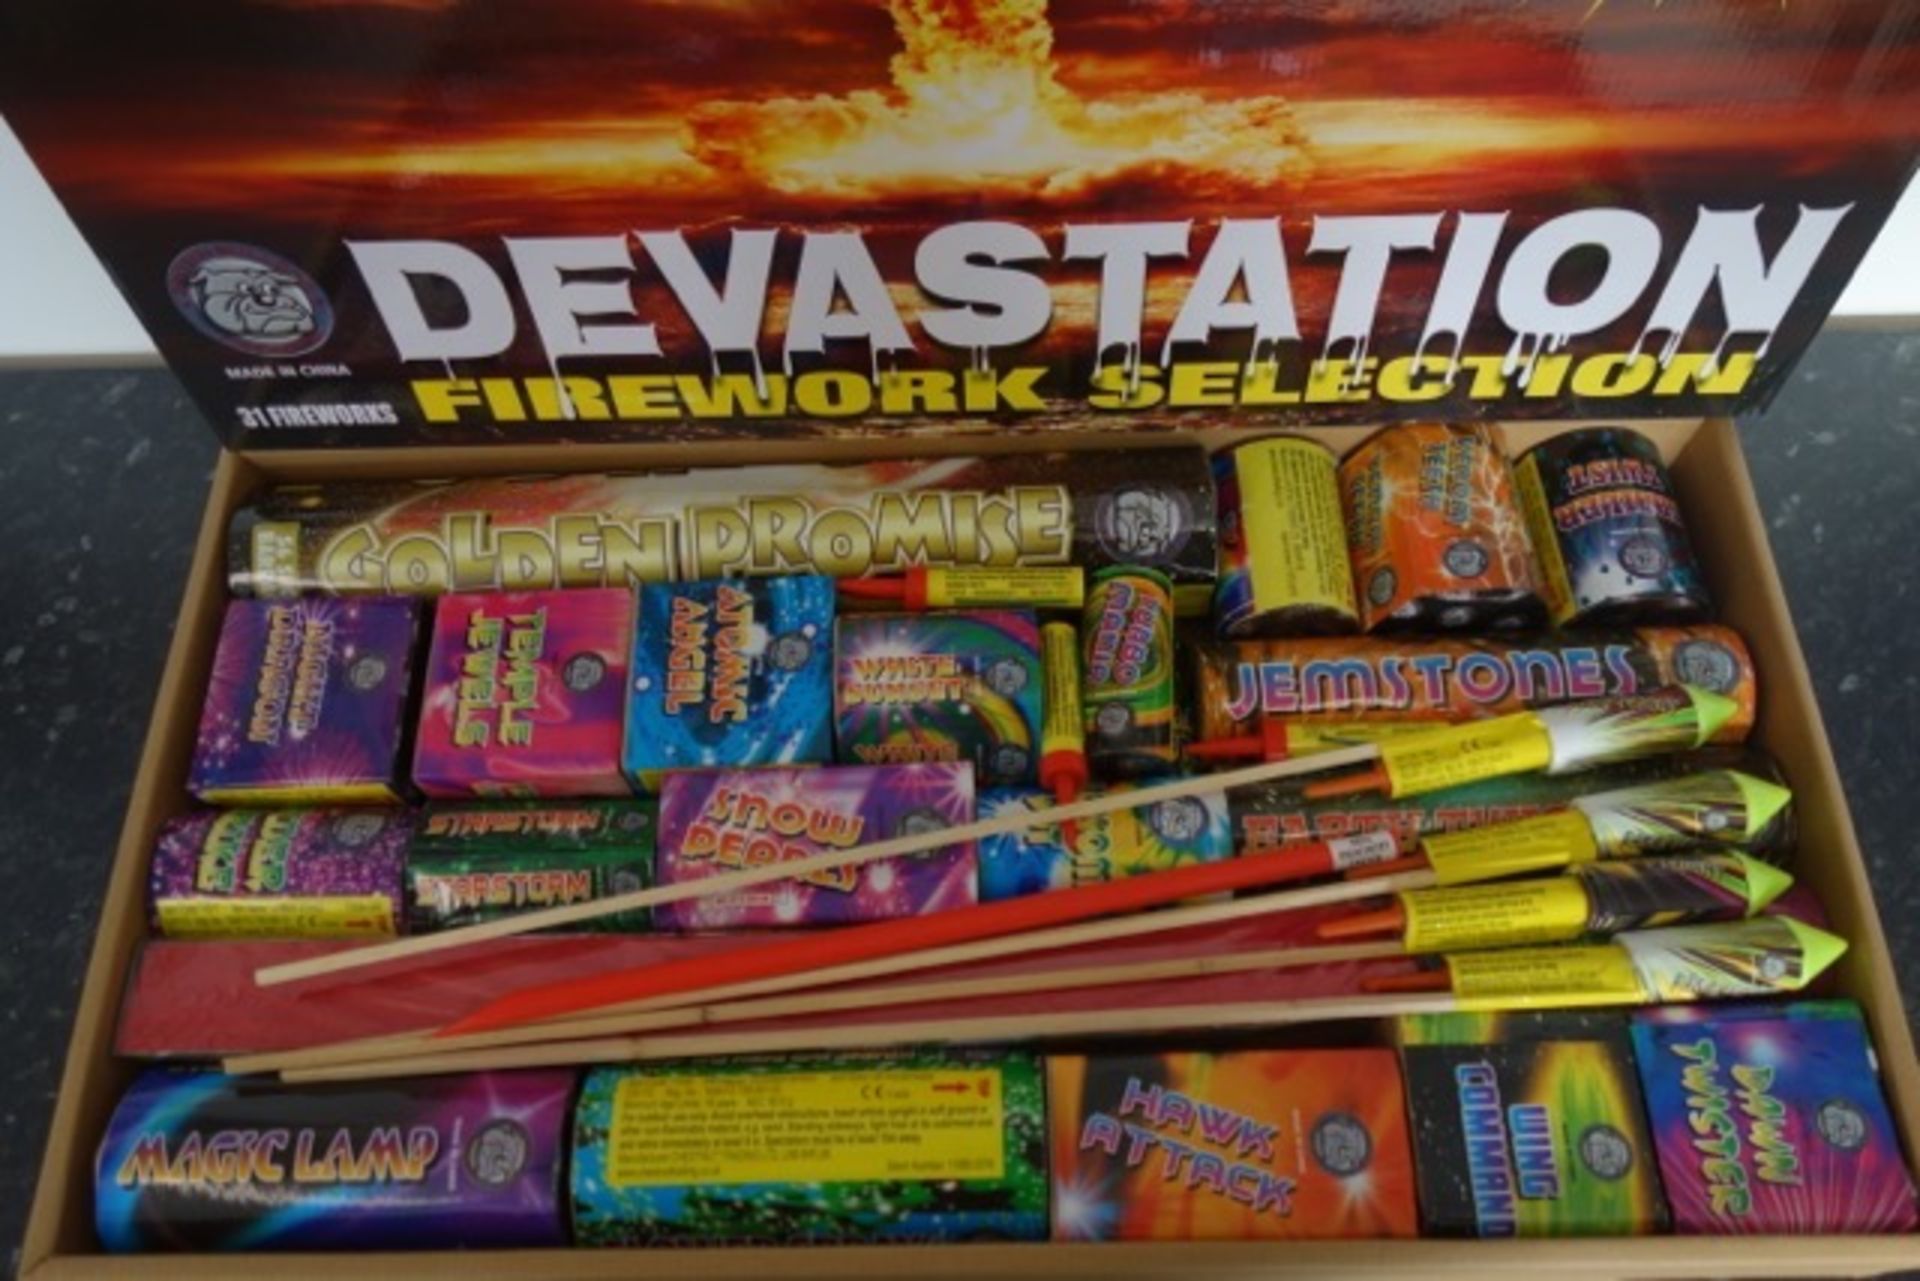 3 x DEVASTATION ULTIMATE SELECTION BOX BY BRITISH BULLDOG FIREWORK COMPANY - THIS YEARS NEW LOOK - Image 2 of 3